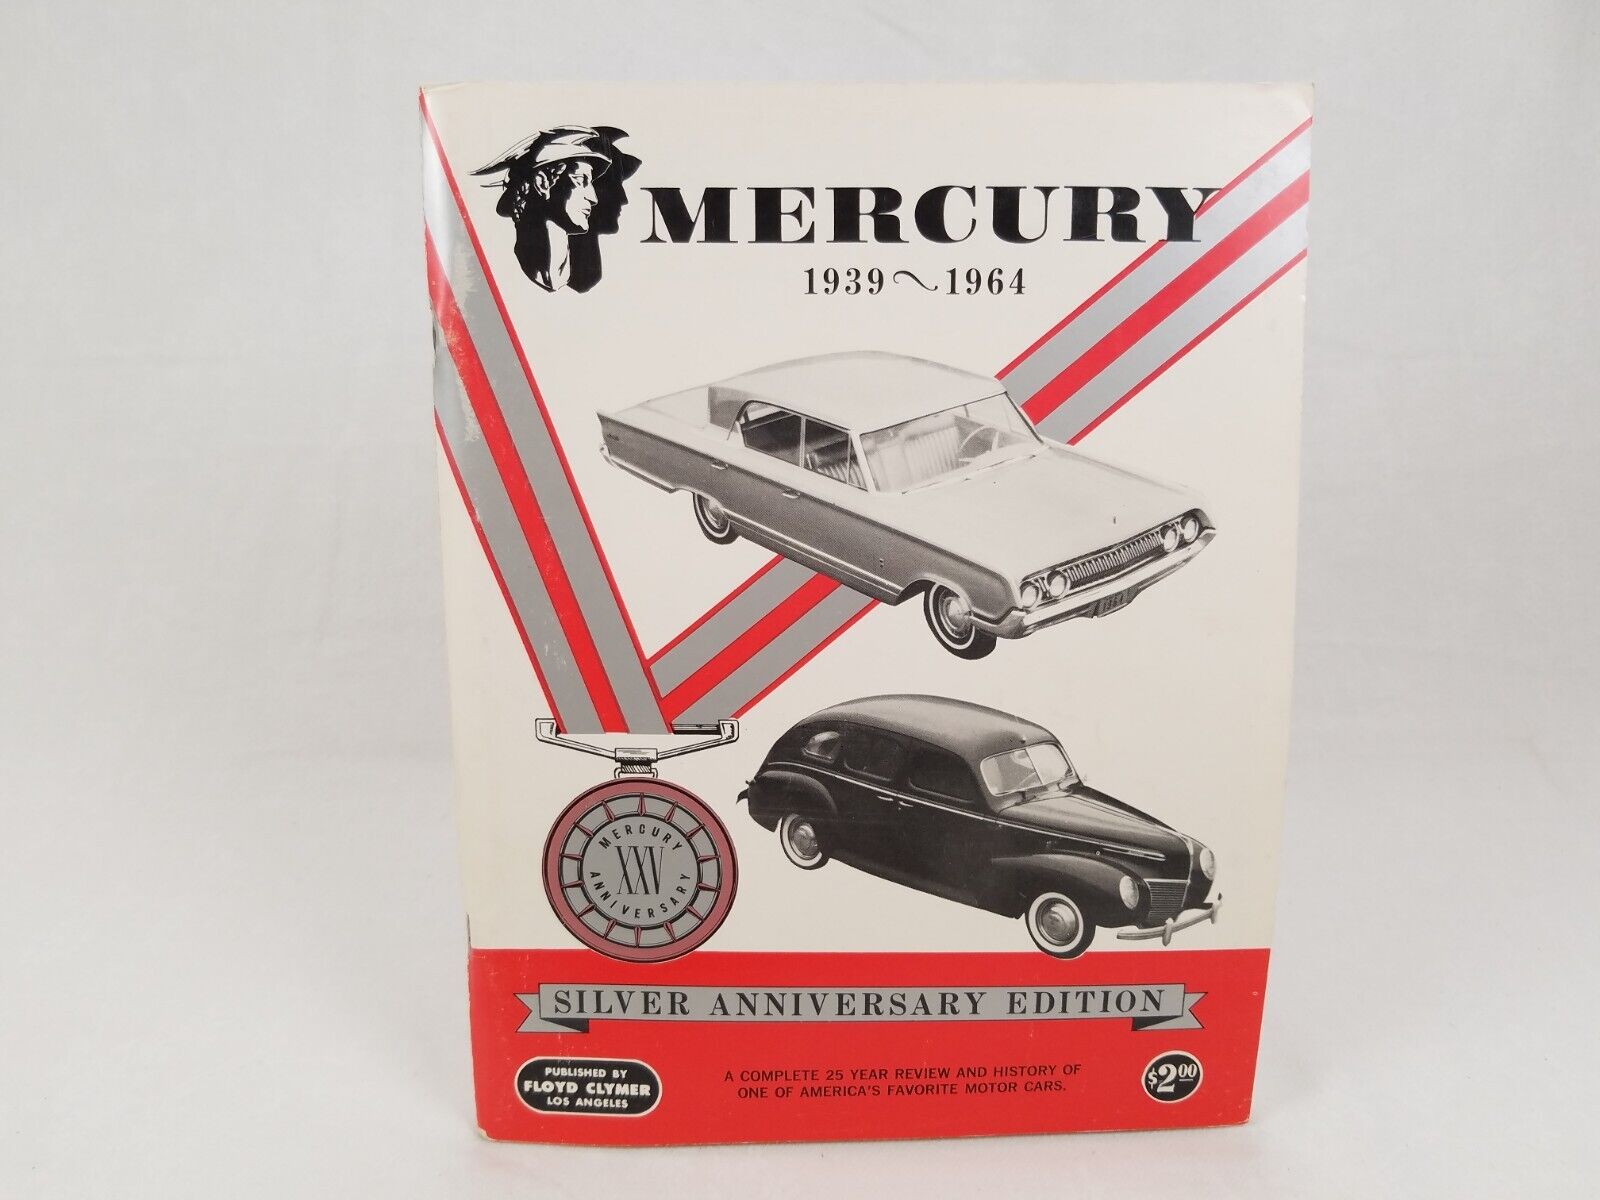 Floyd Clymer Mercury 1939-1964 Silver Anniversary Edition 25 year History Review